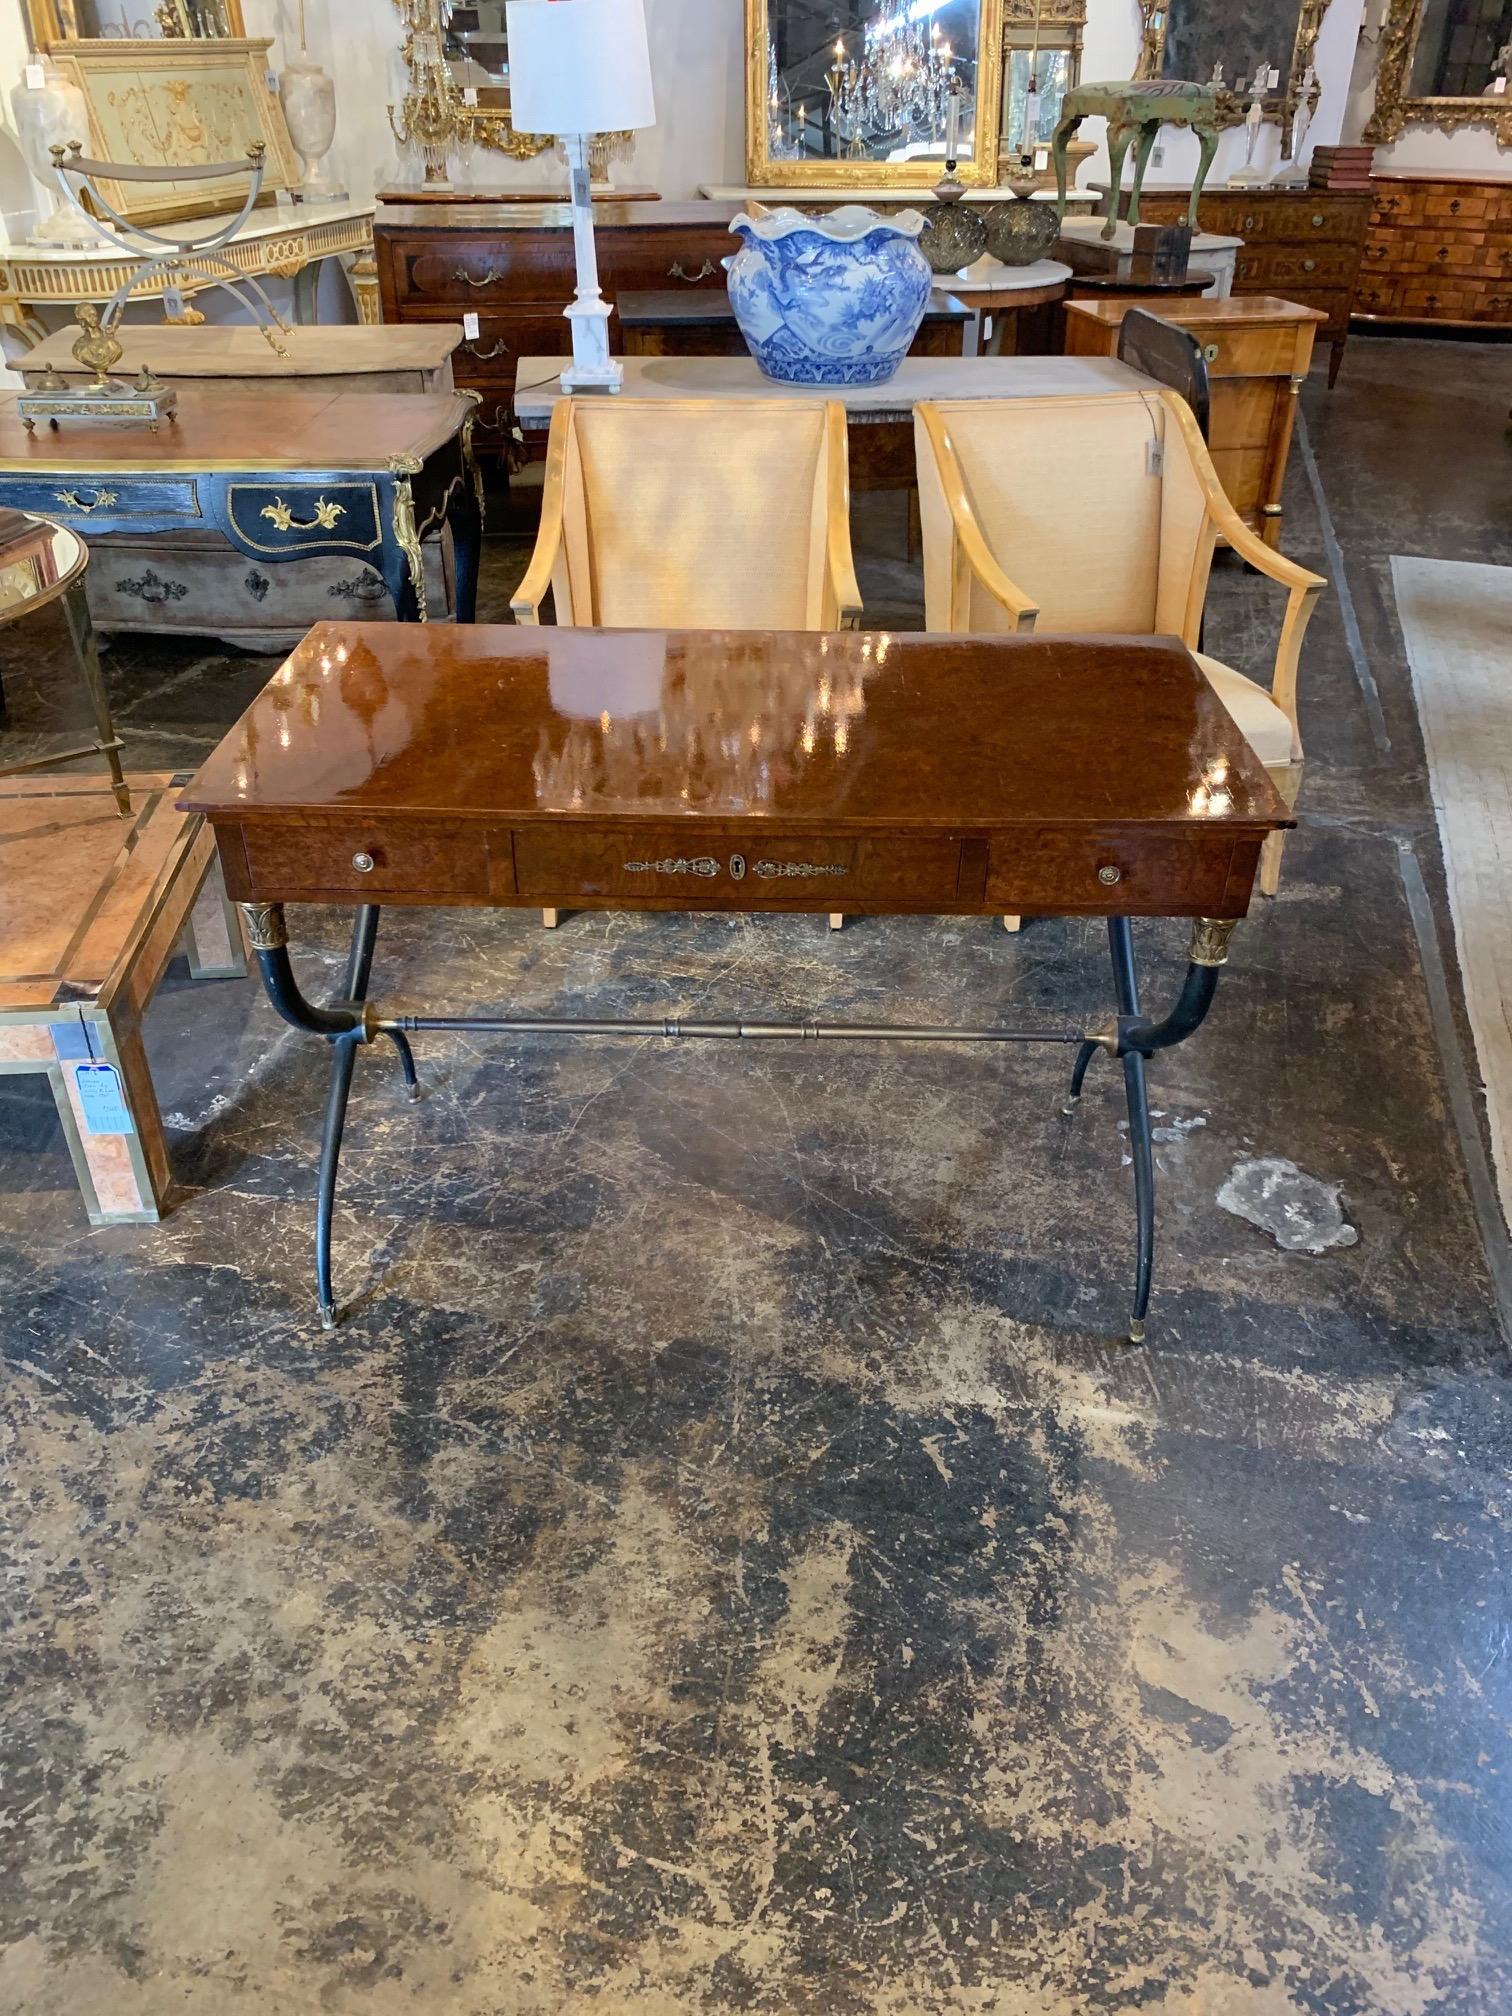 Gorgeous French mahogany midcentury Directoire writing desk on a painted steel base. Amazing polish and wood grain on the top. A fabulous piece that could go in a variety of decors!